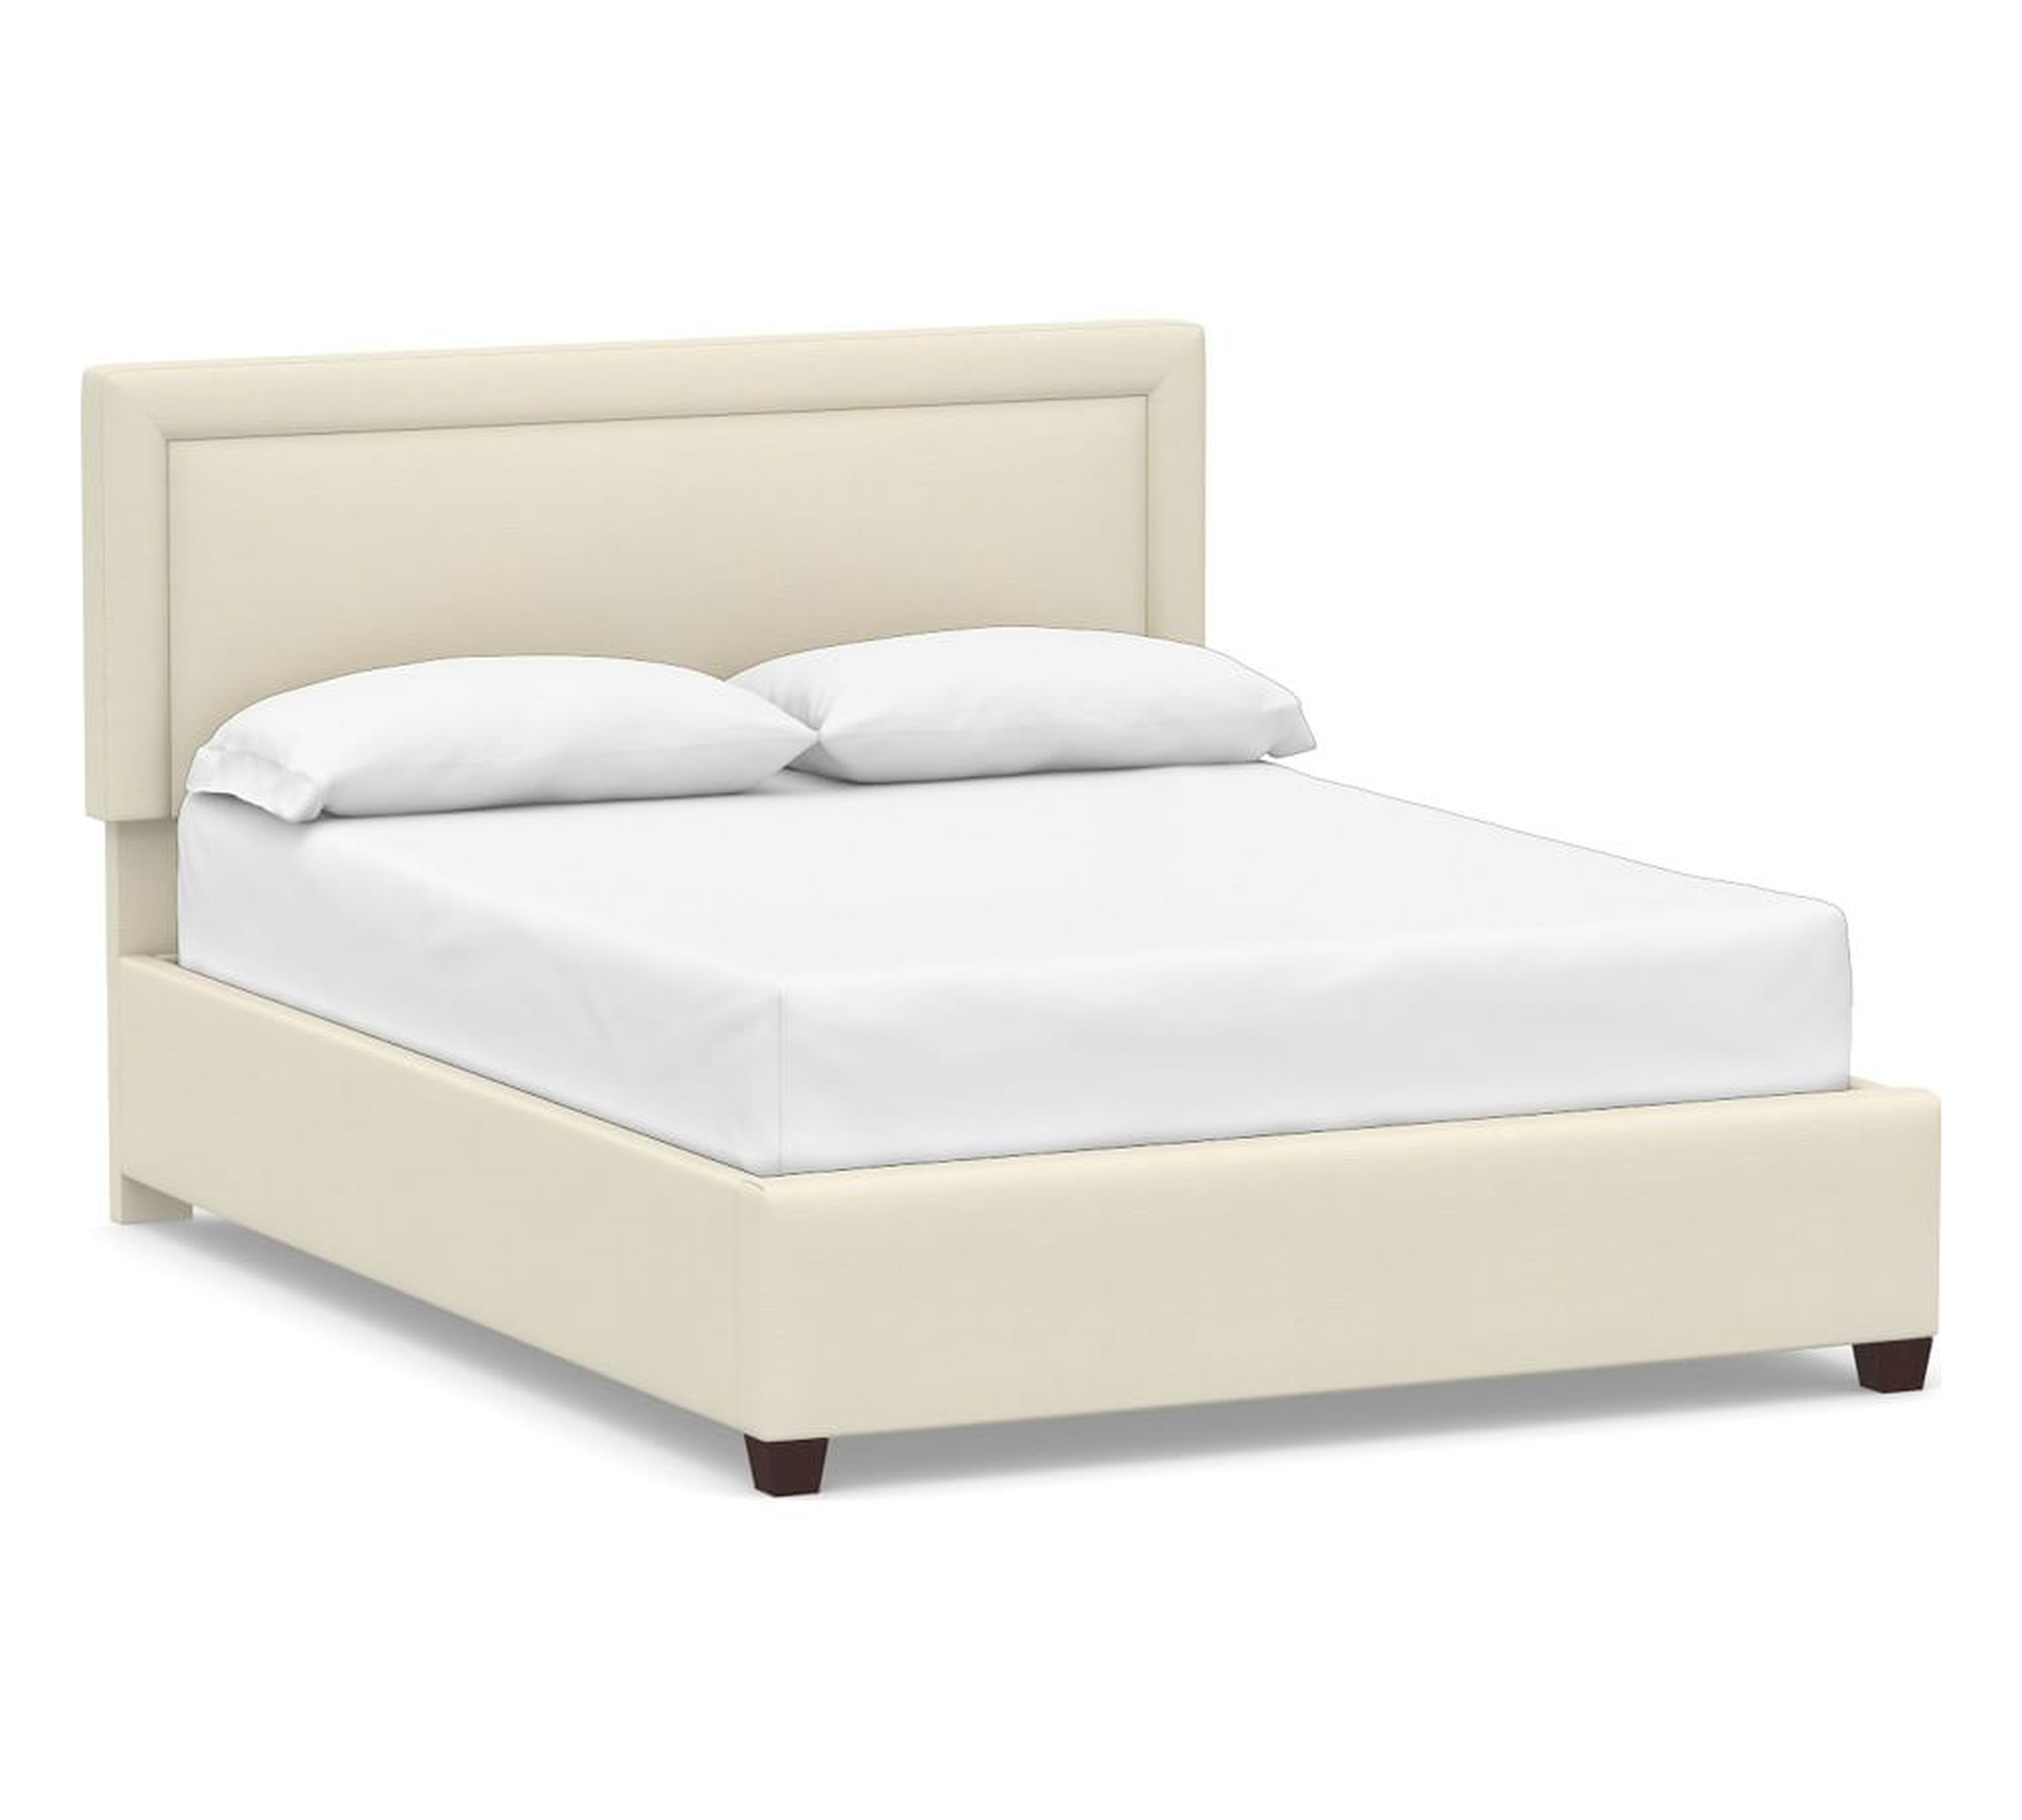 Elliot Square Upholstered Bed, Queen, Park Weave Ivory - Pottery Barn